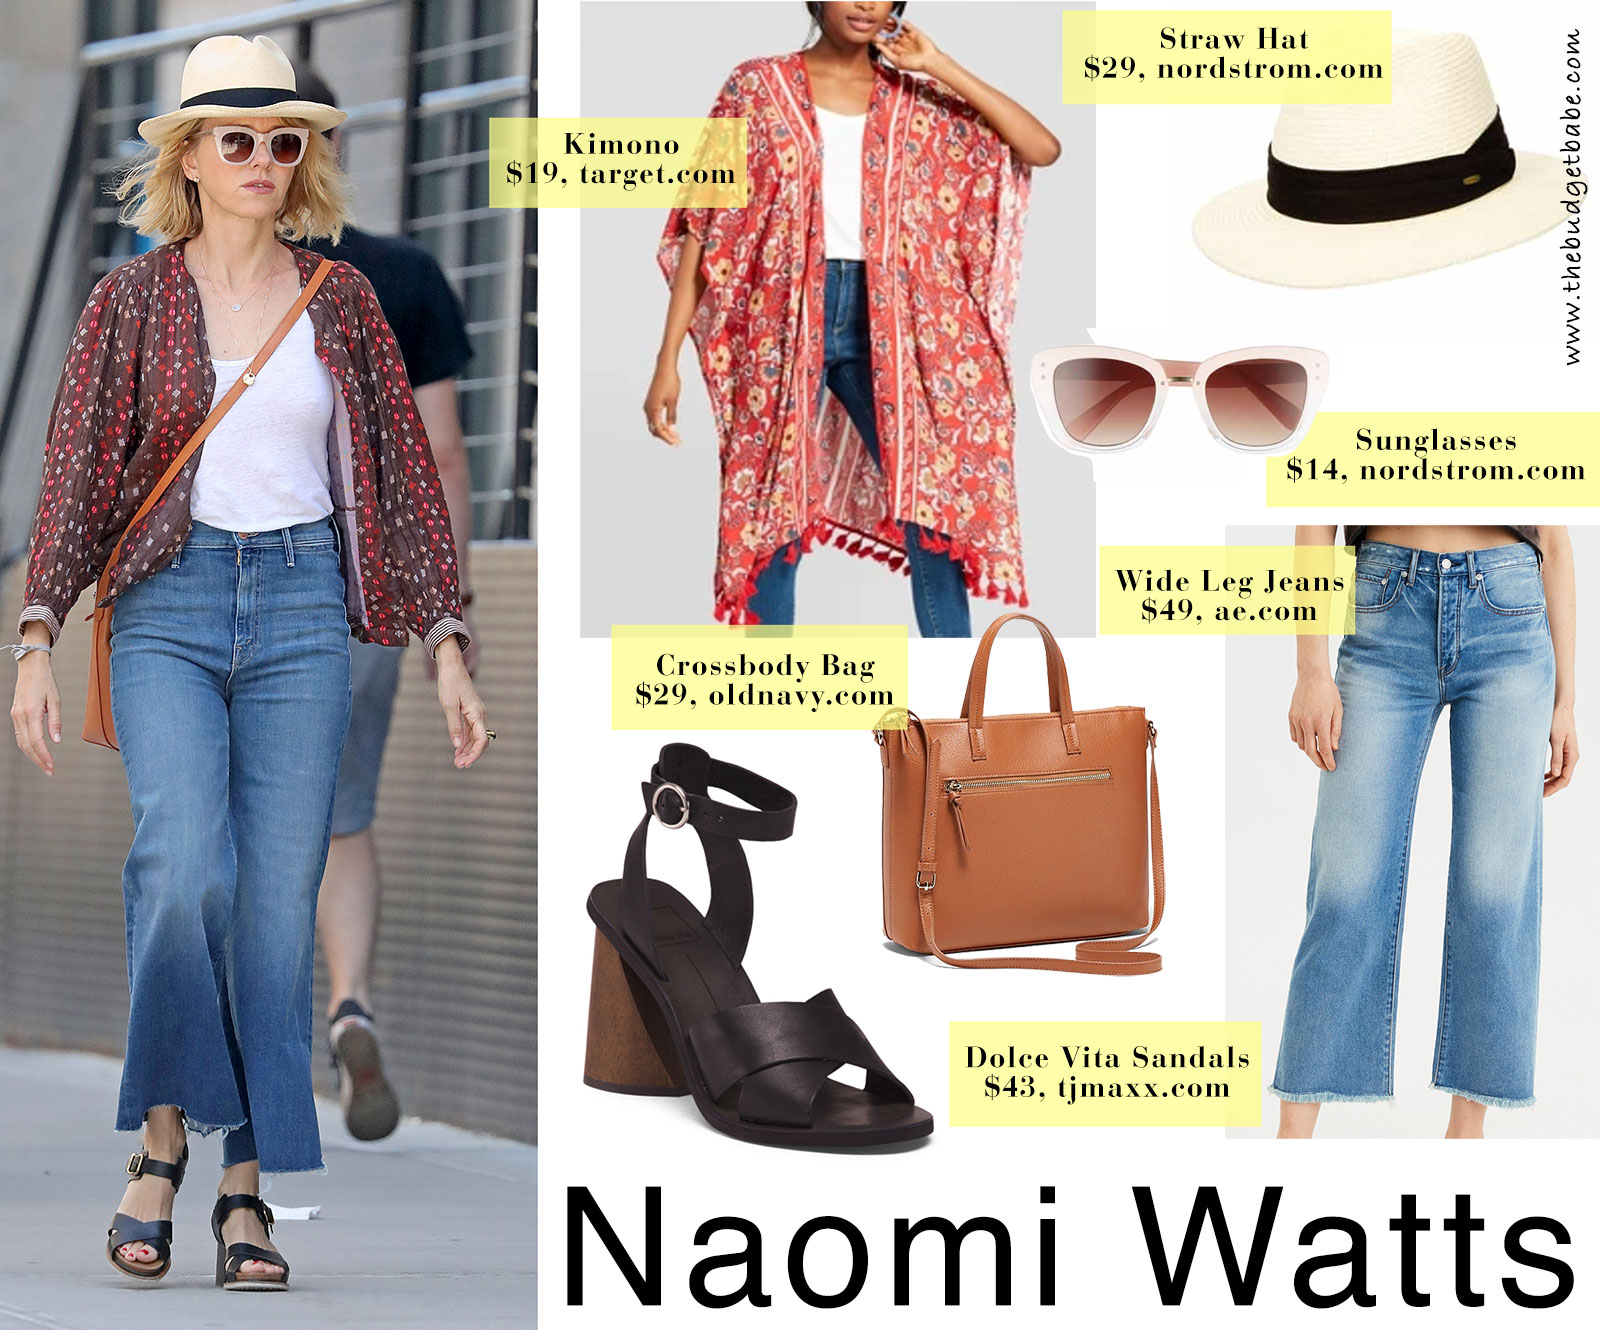 Naomi Watts' print jacket and wide leg pants look for less